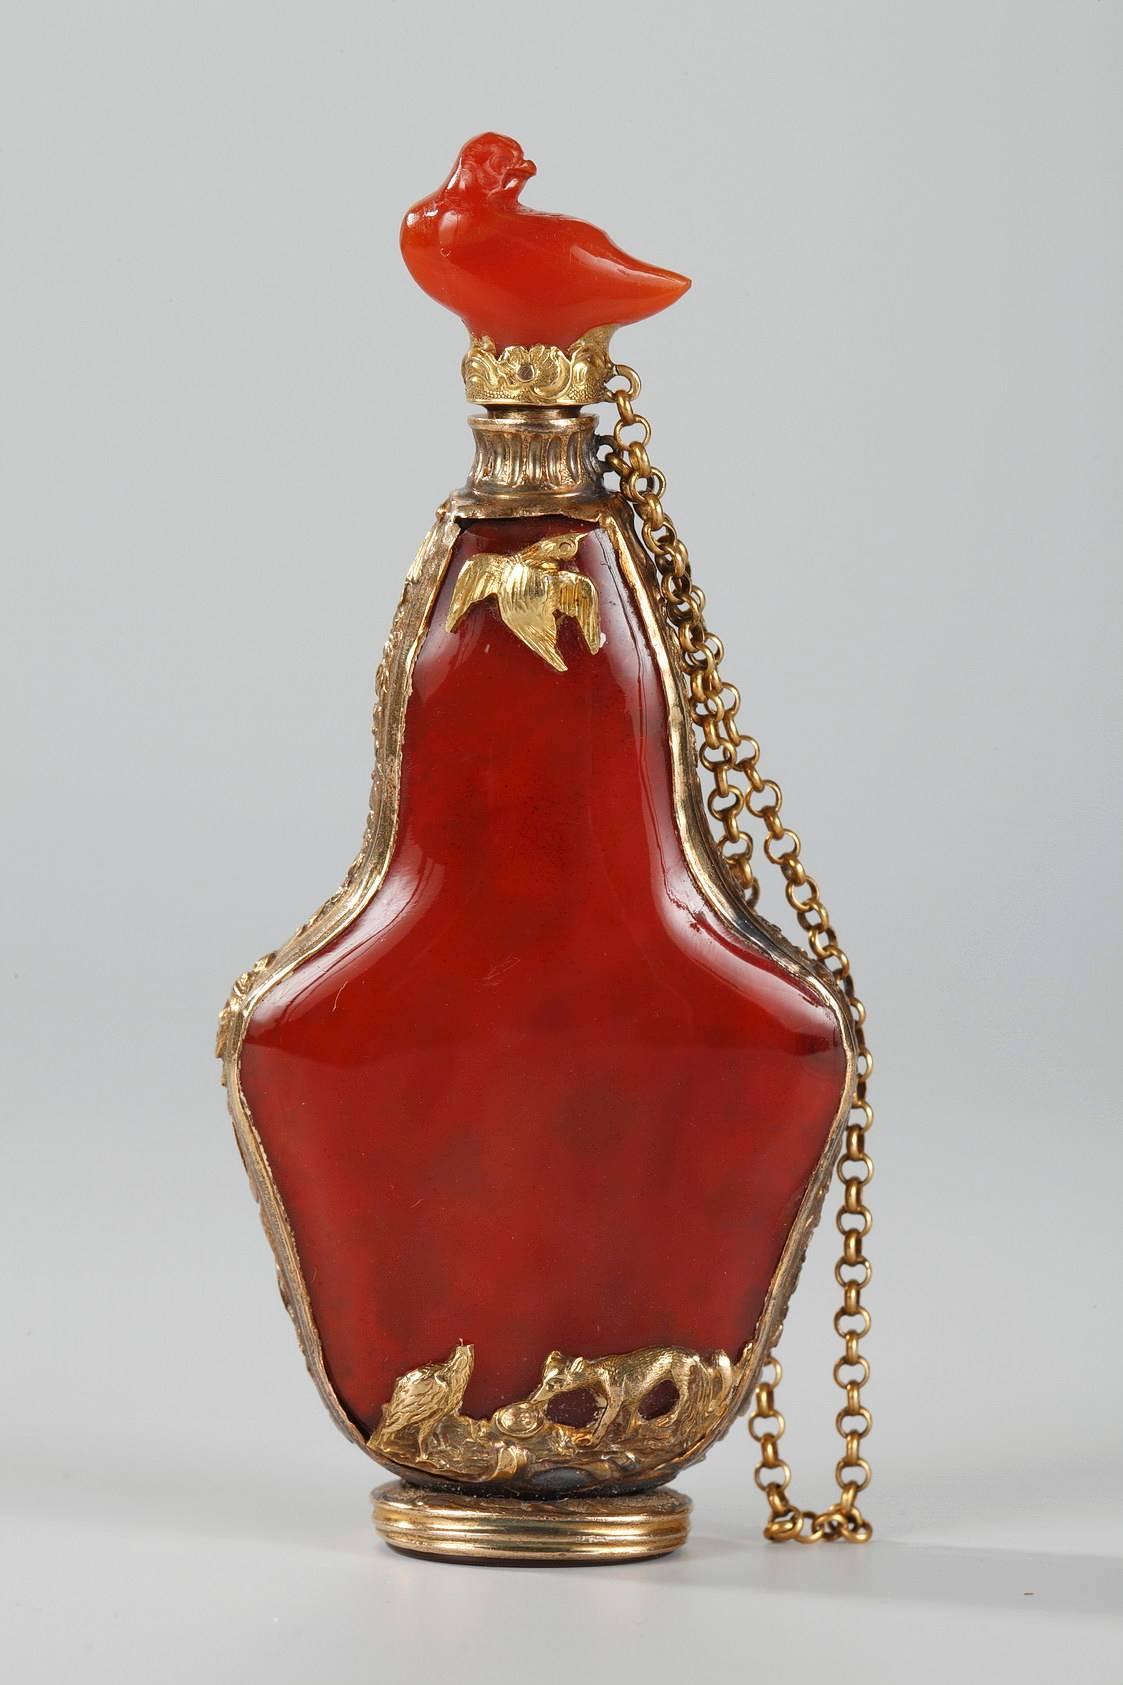 Pear-shaped flask in orange-red carnelian gemstone, set in a gold mounting that is intricately embellished with stylized flowers. Each side of the mounting’s base features two animals: on one side, a fox is watching a stork with its beak in a vase,